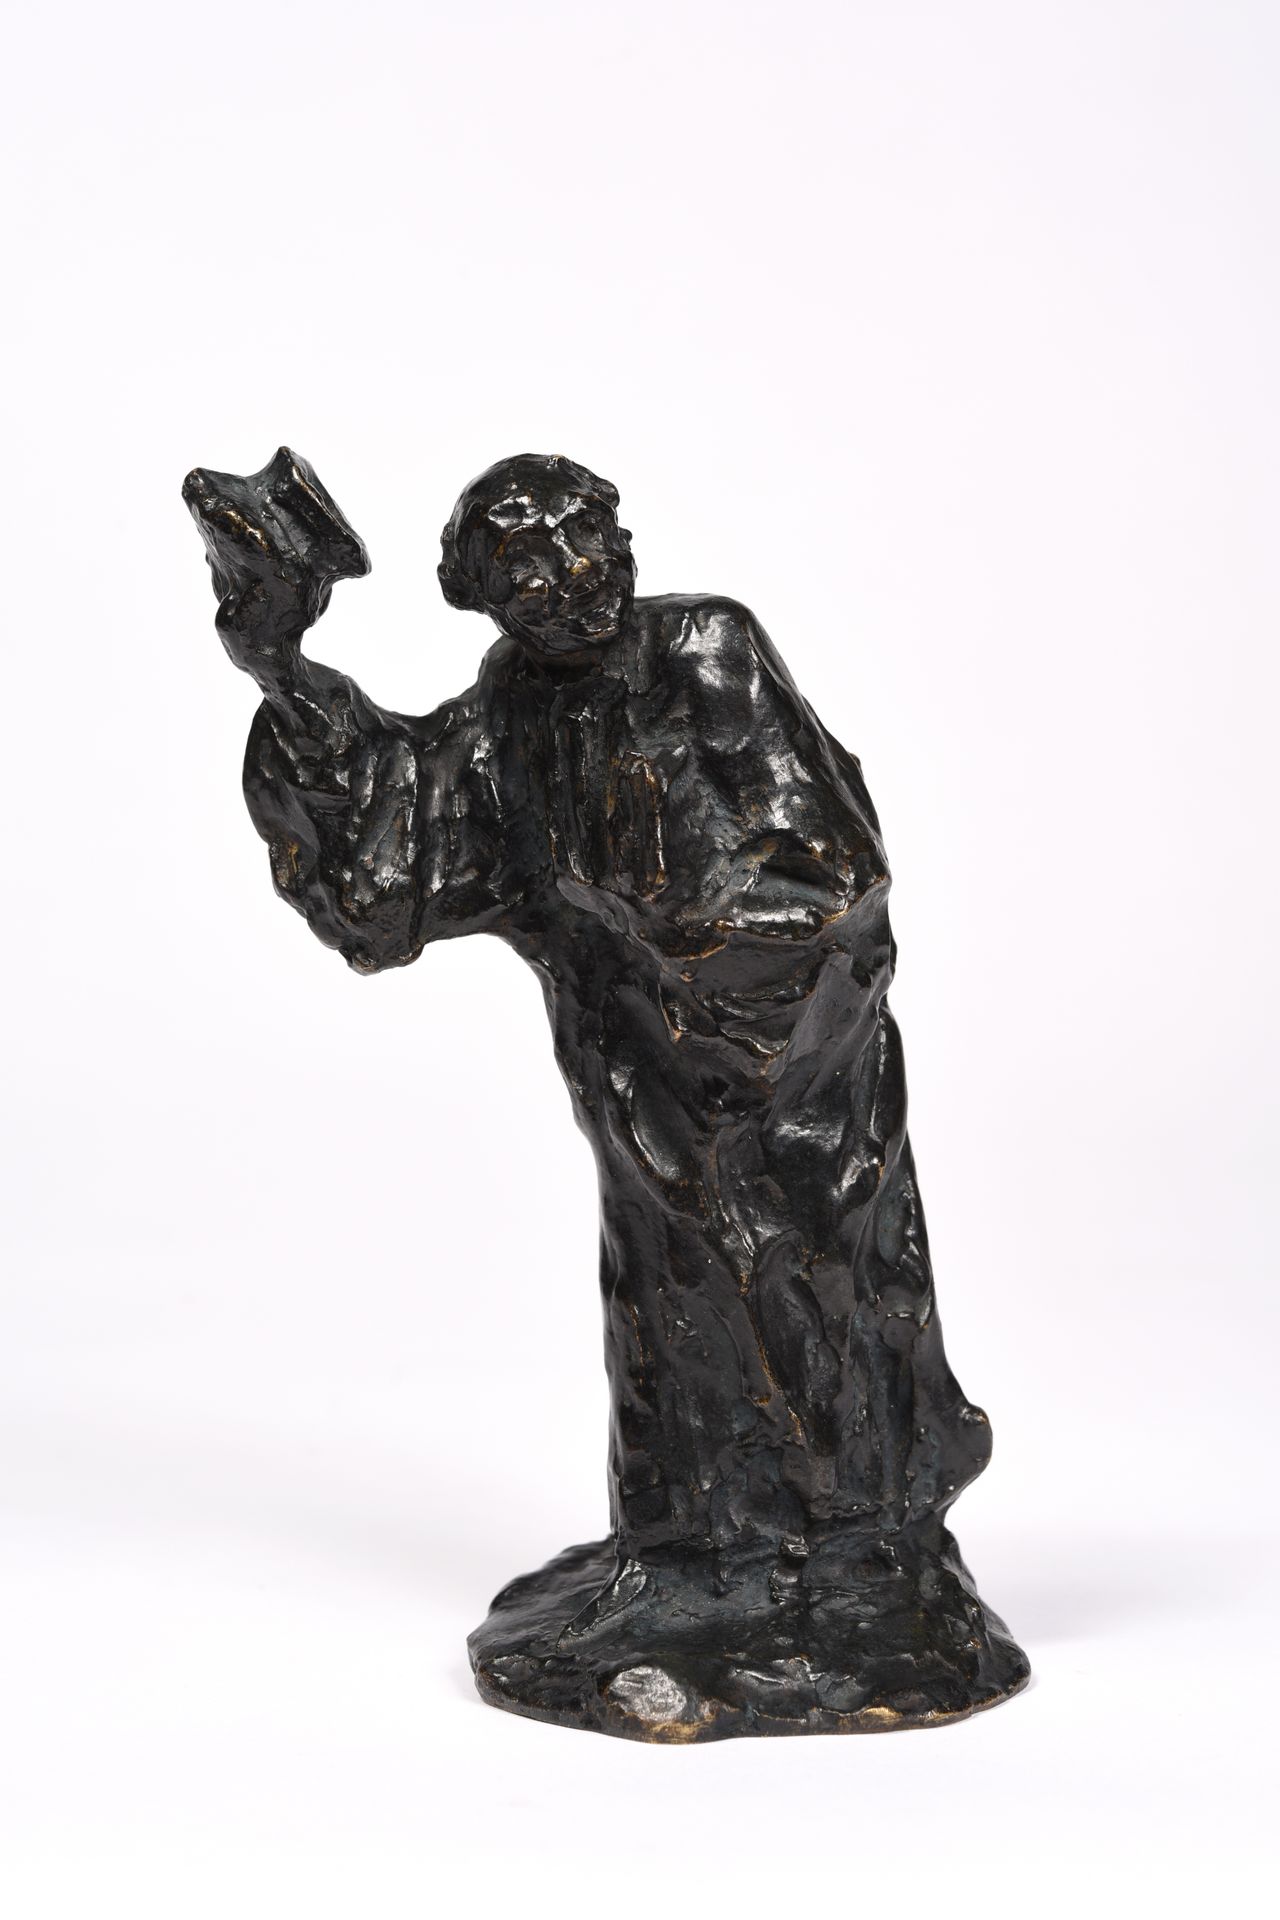 Null After HONORÉ DAUMIER (1808-1879)

The Lawyer Saluting

Bronze proof with br&hellip;